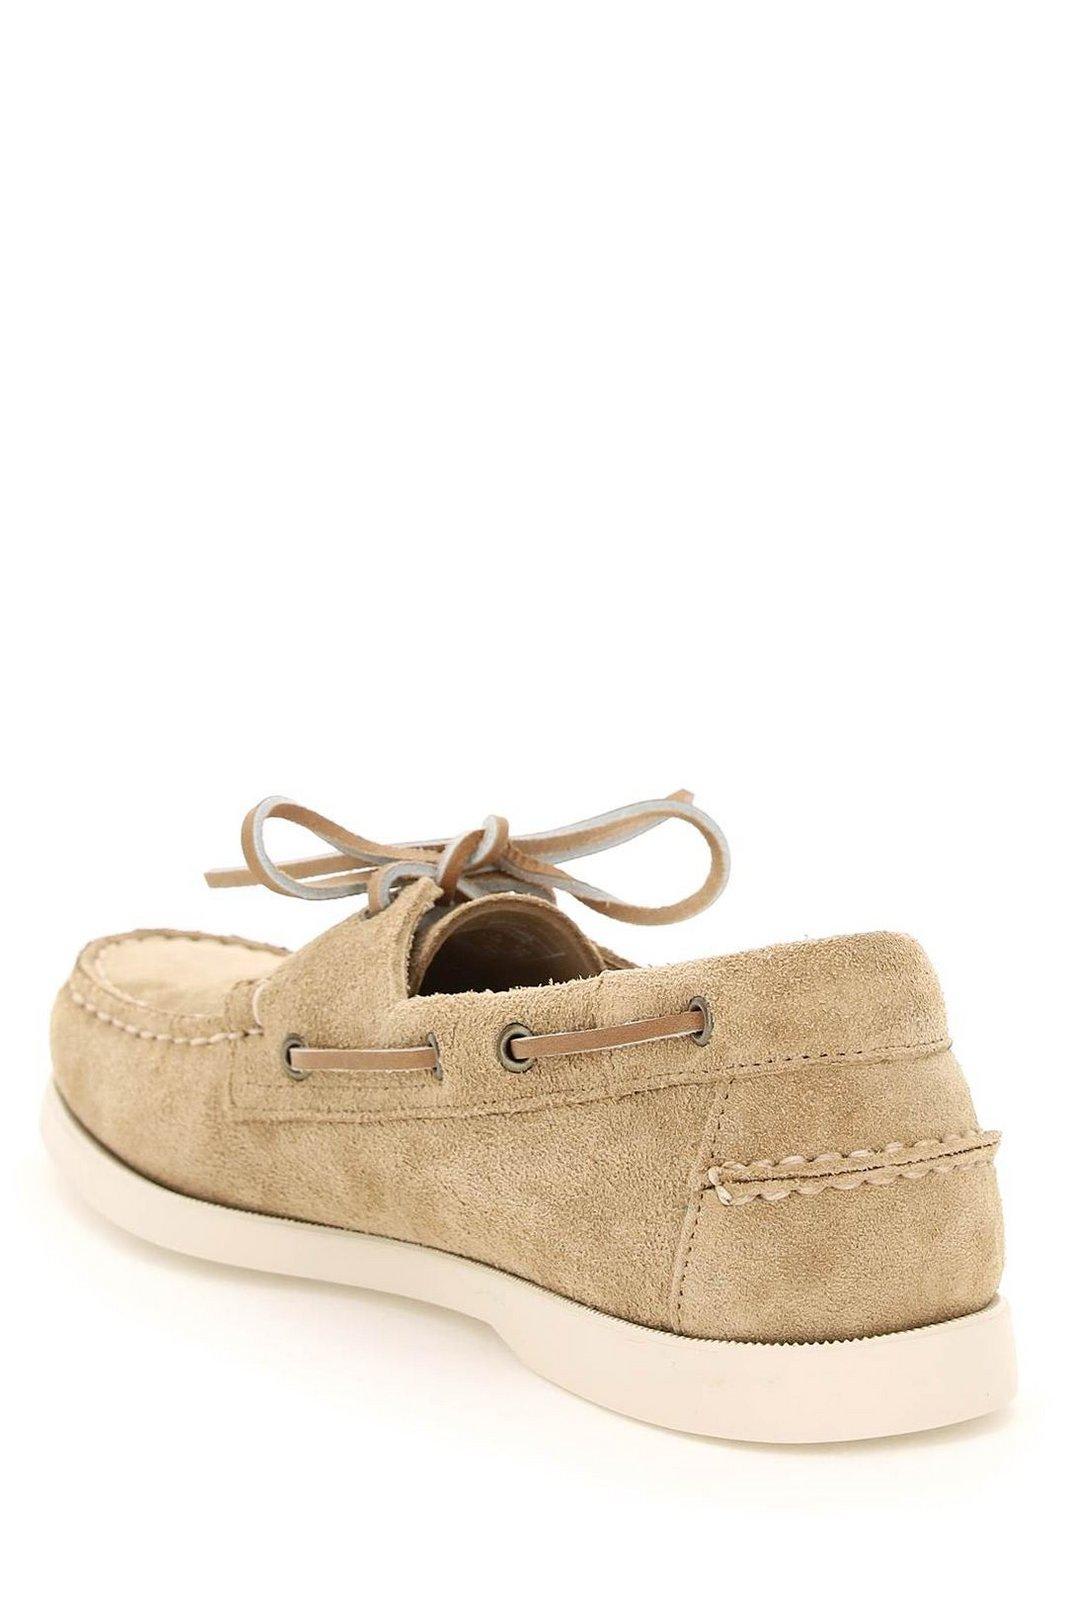 Shop Sebago Lace-up Round Toe Boat Shoes In Beige Camel